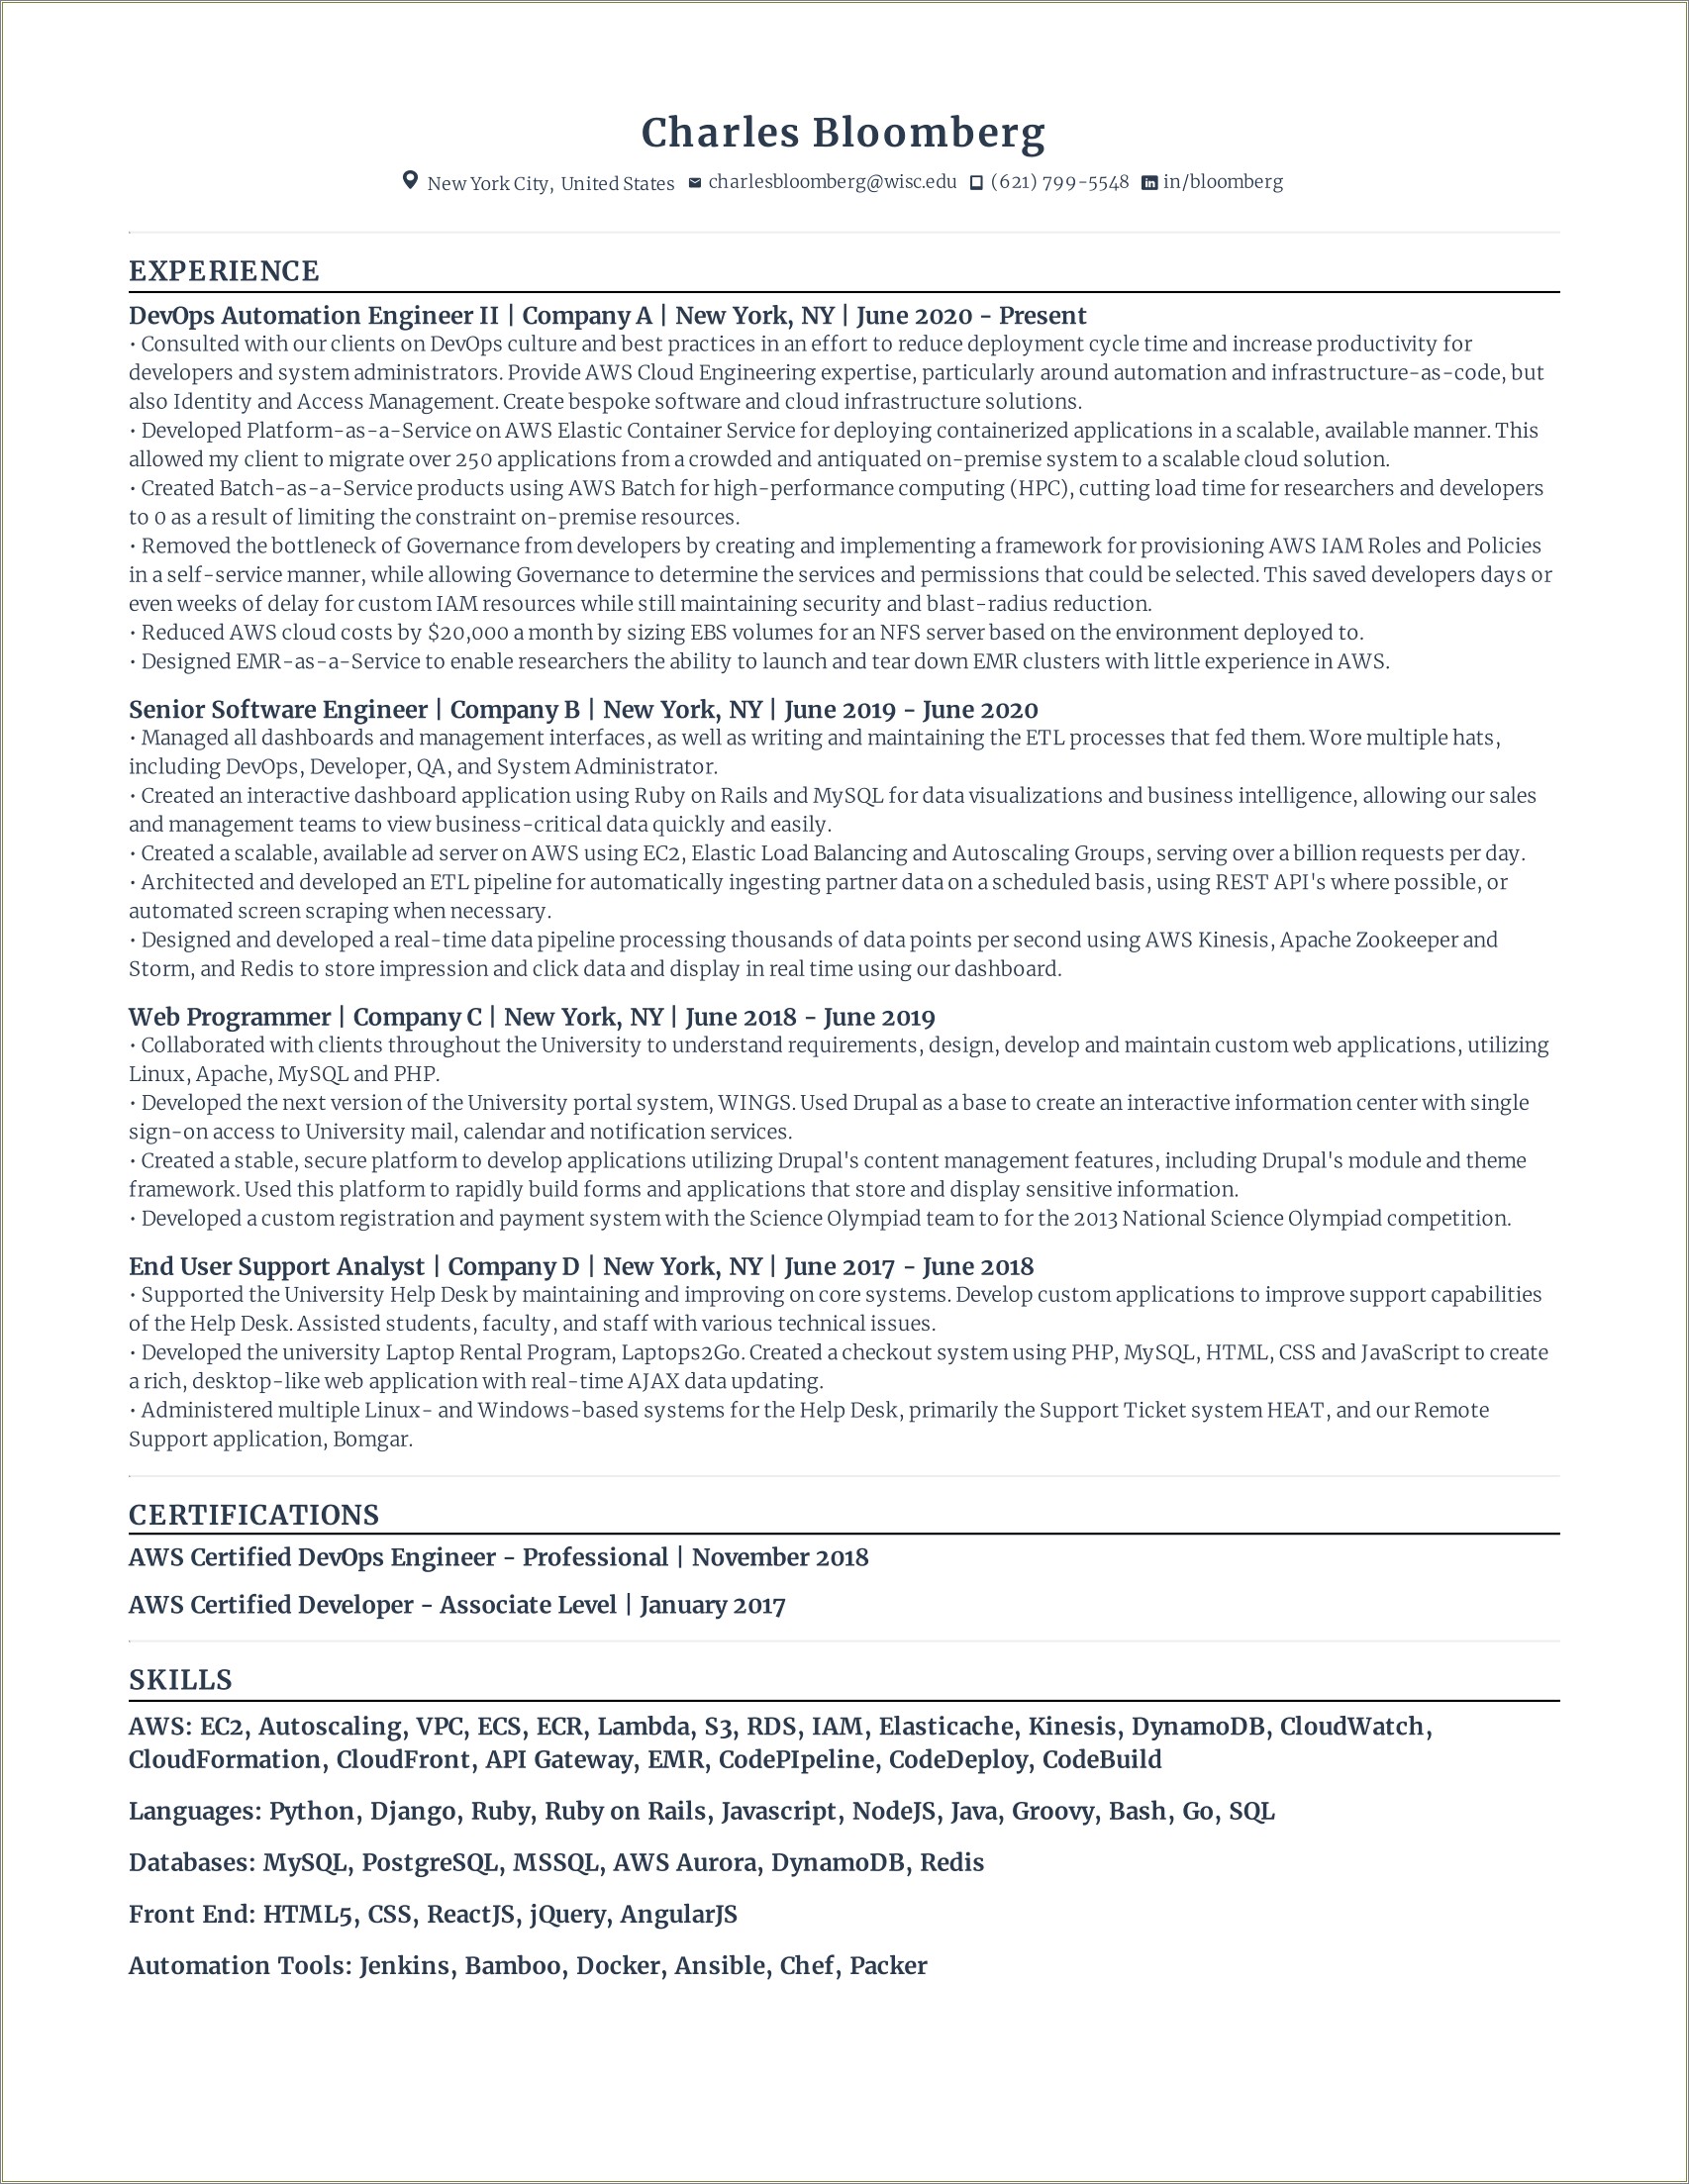 1 Year Experience Resume Format For Devops Engineer